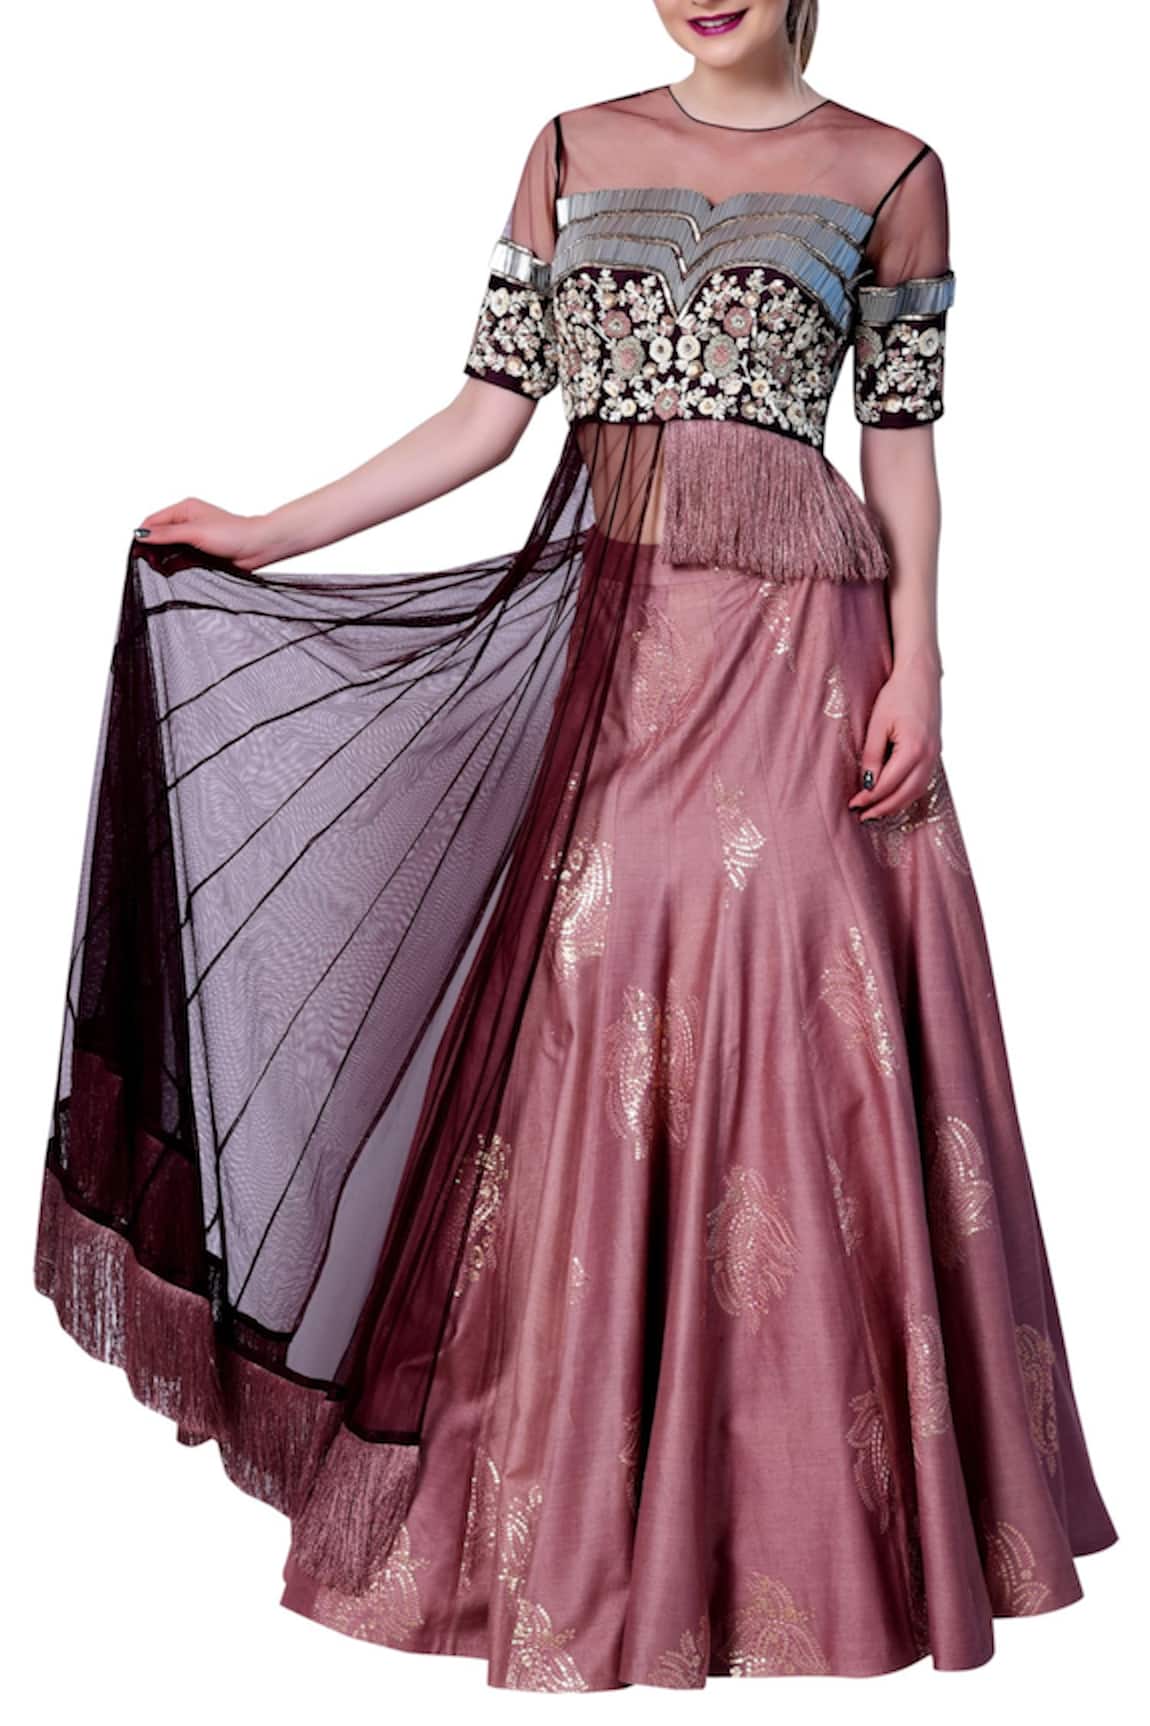 Vedangi Agarwal Half jacket style top with embroidered skirt